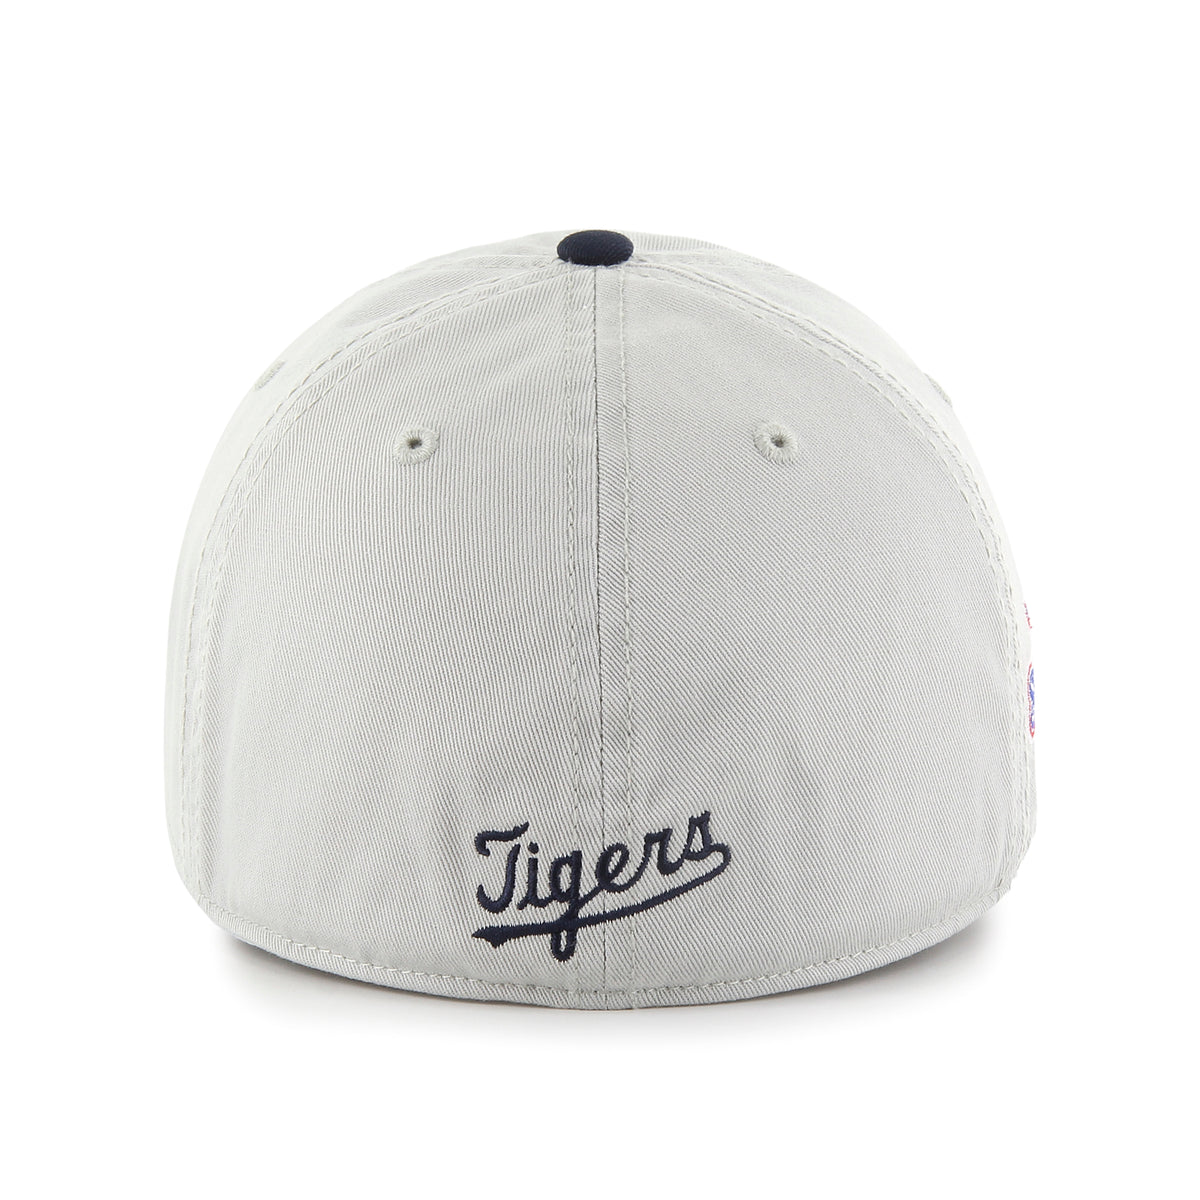 DETROIT TIGERS COOPERSTOWN WORLD SERIES SURE SHOT CLASSIC TWO TONE '47 FRANCHISE